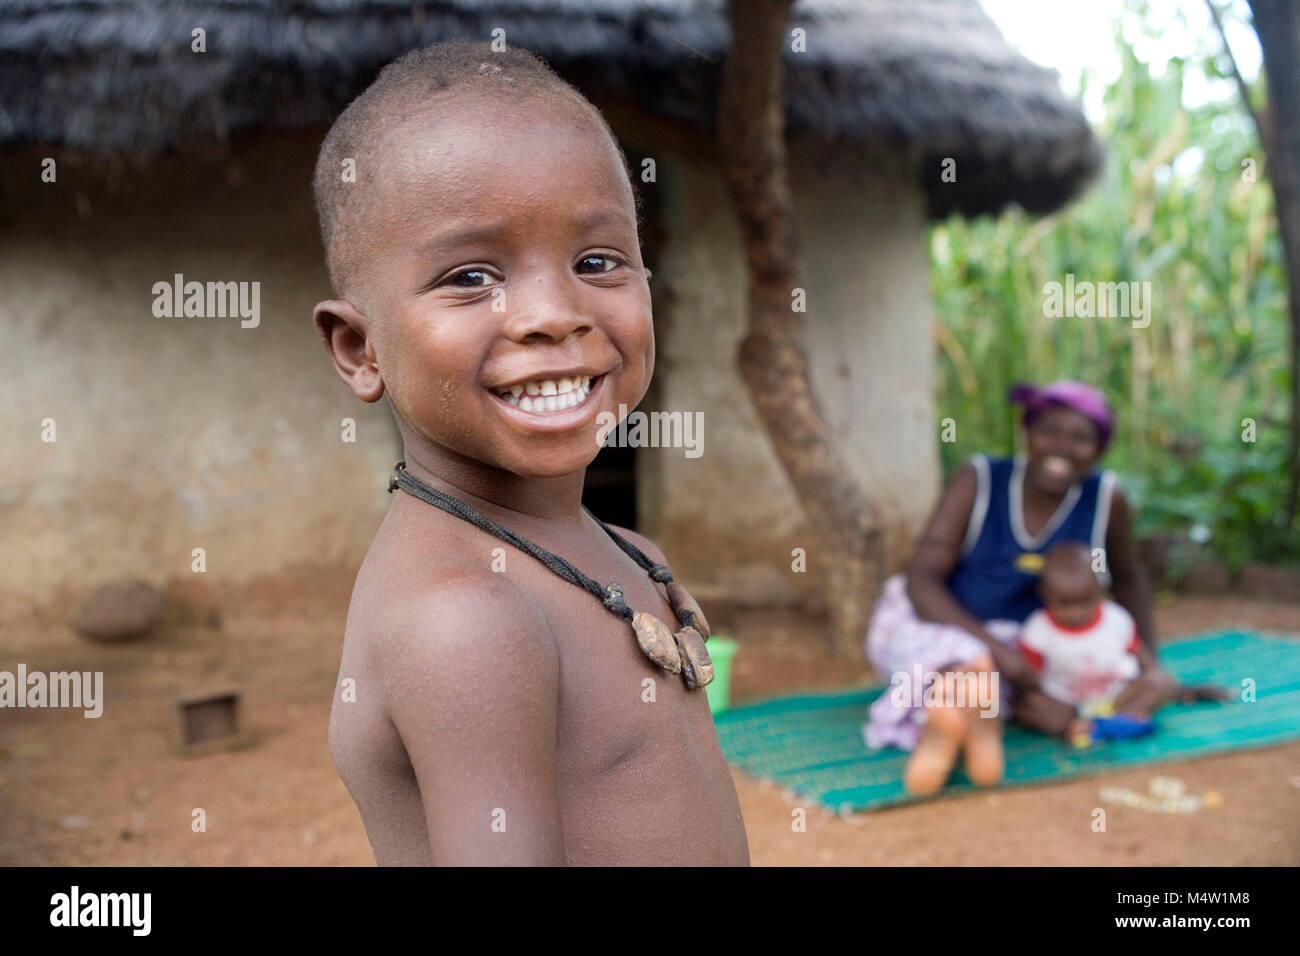 Portrait of Senegalese child in rural are of Senegalsmiling boy Stock Photo